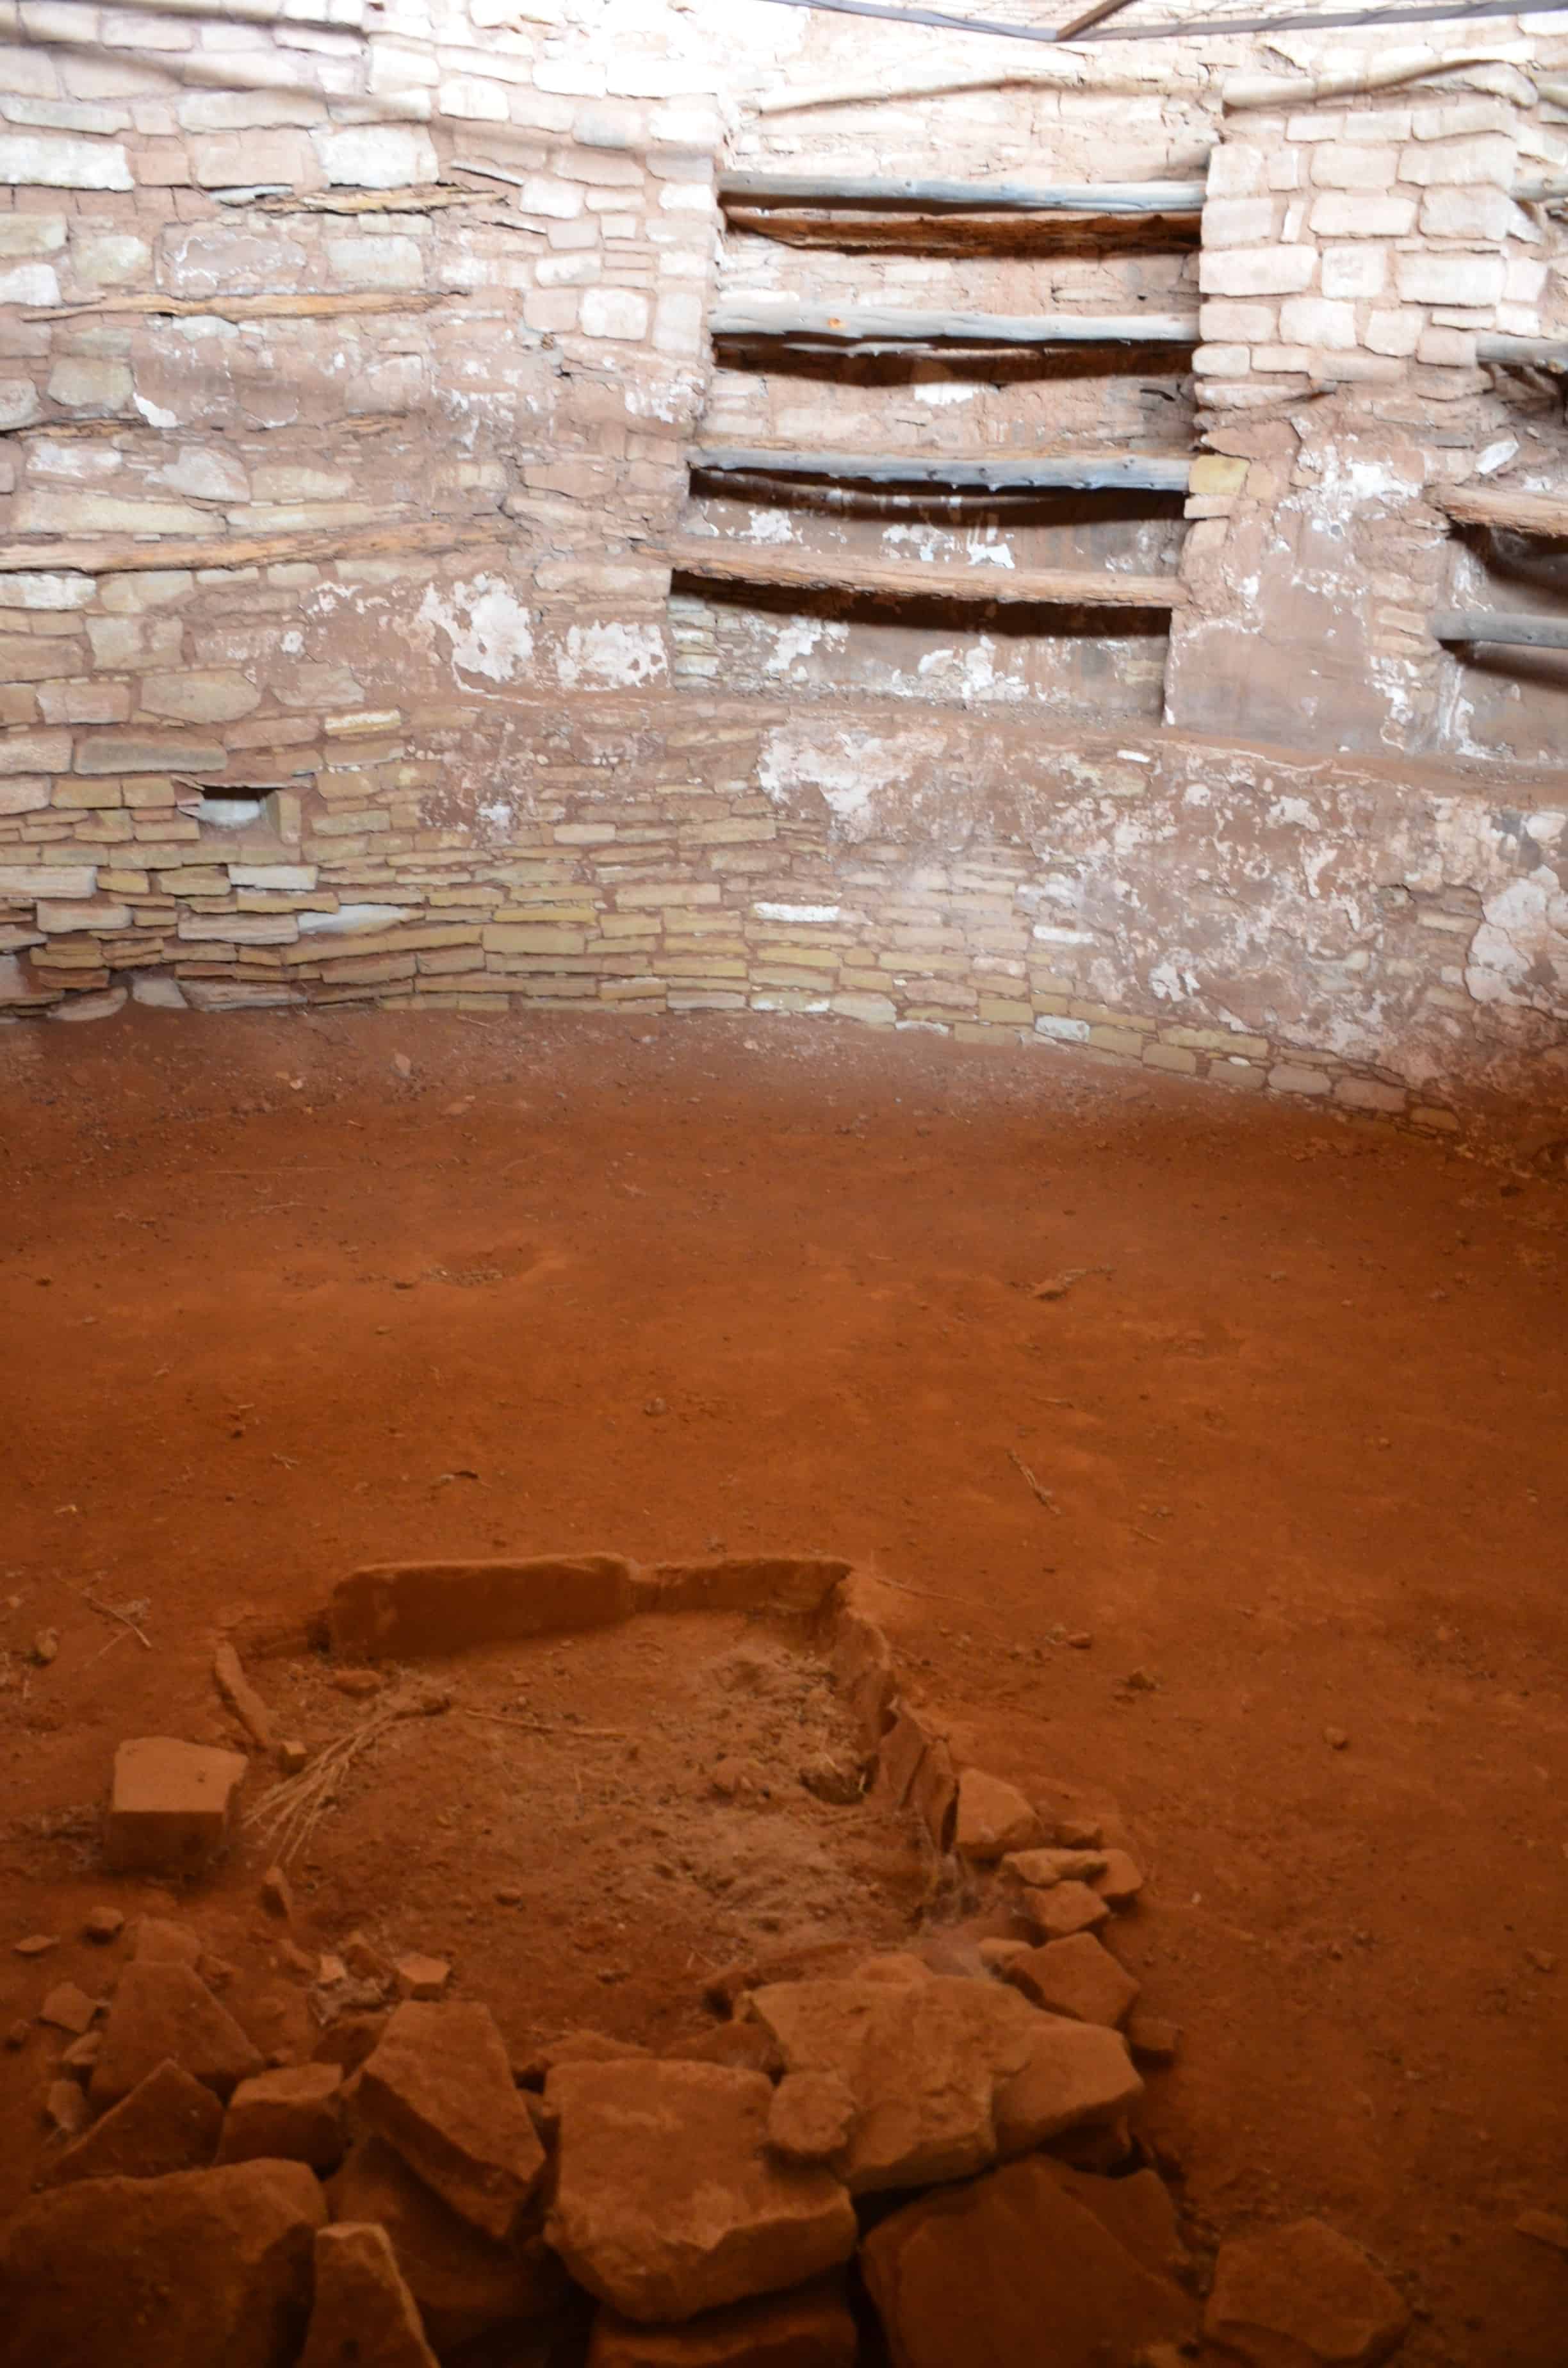 Kiva at Lowry Pueblo at Canyons of the Ancients National Monument in Colorado